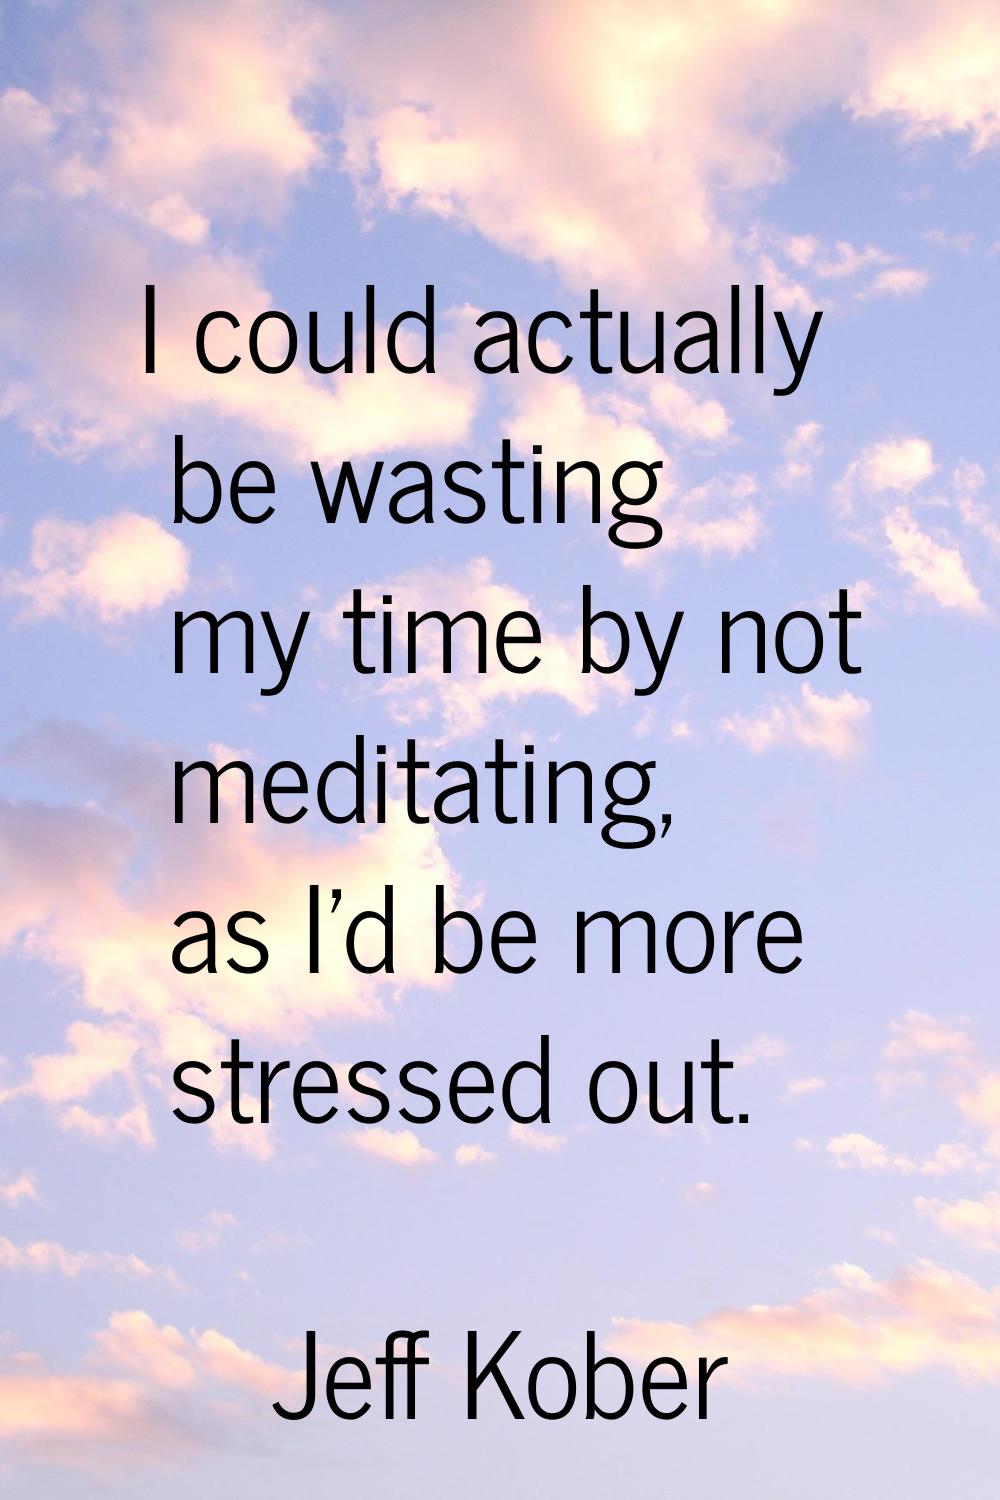 I could actually be wasting my time by not meditating, as I'd be more stressed out.